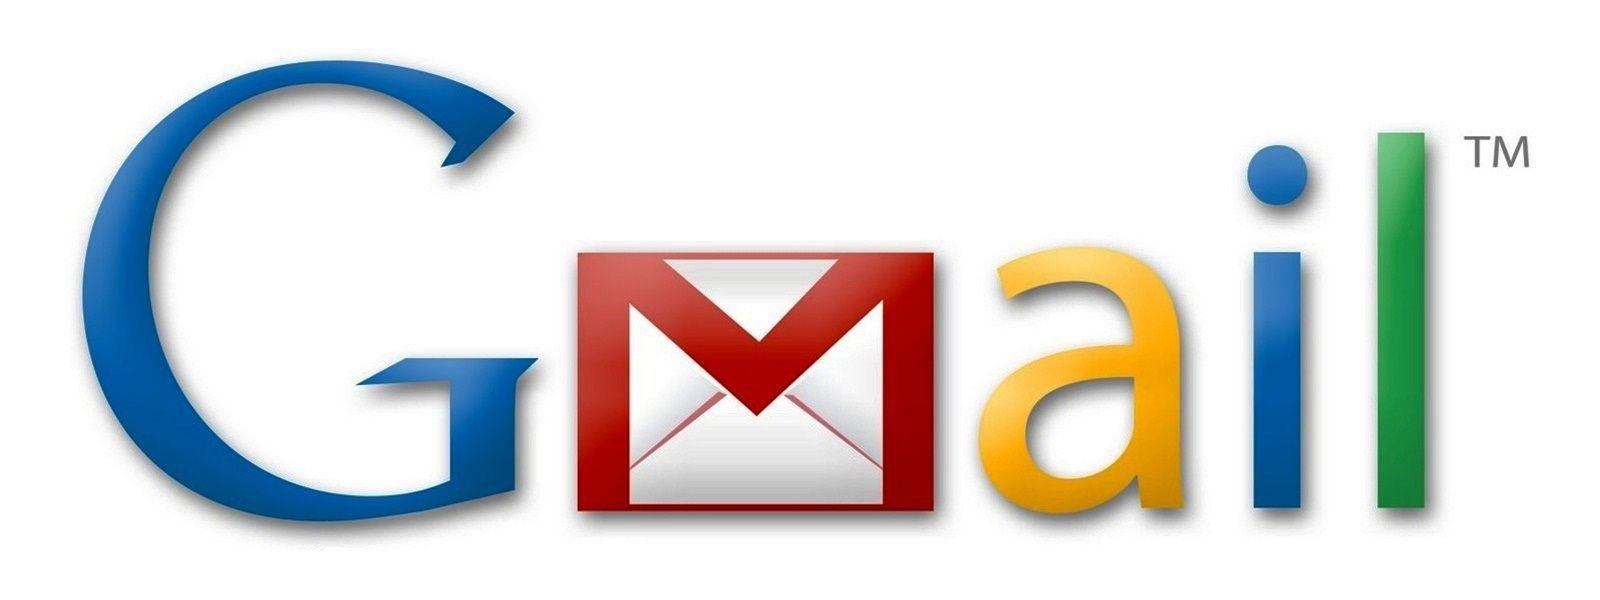 Gmail Logo Wallpapers - Wallpaper Cave